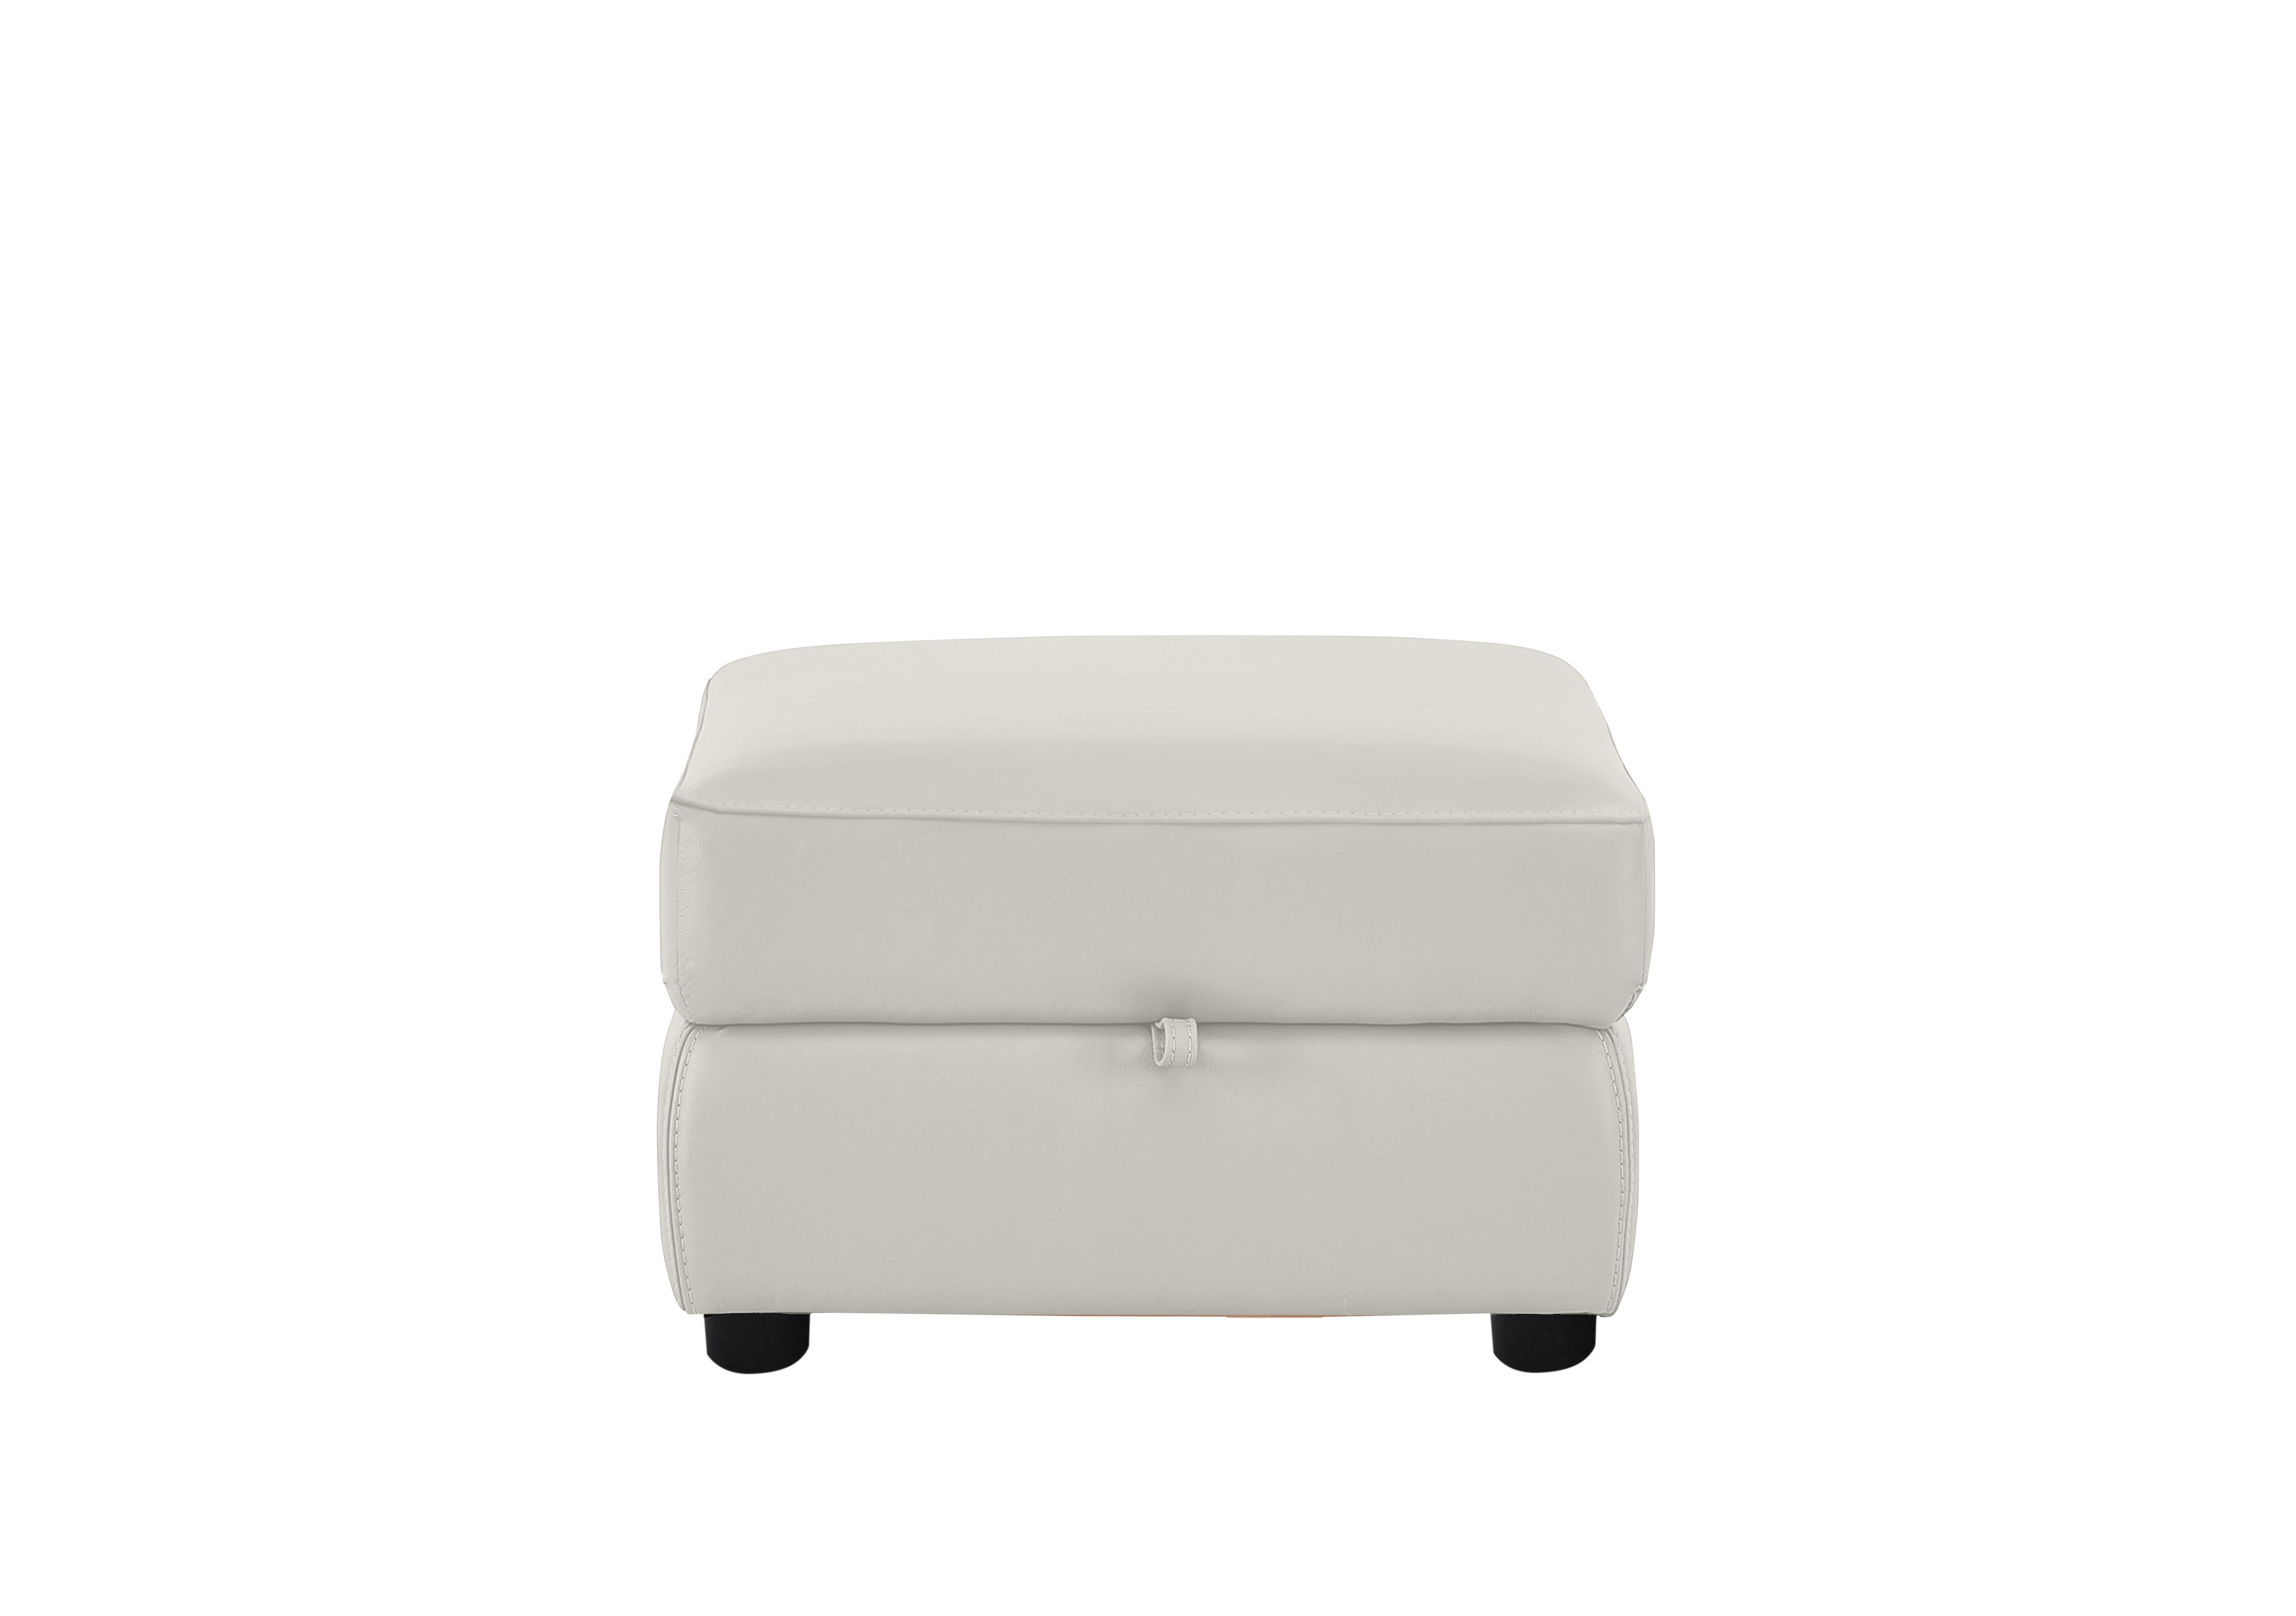 Snug Leather Storage Footstool in Bv-156e Frost on Furniture Village